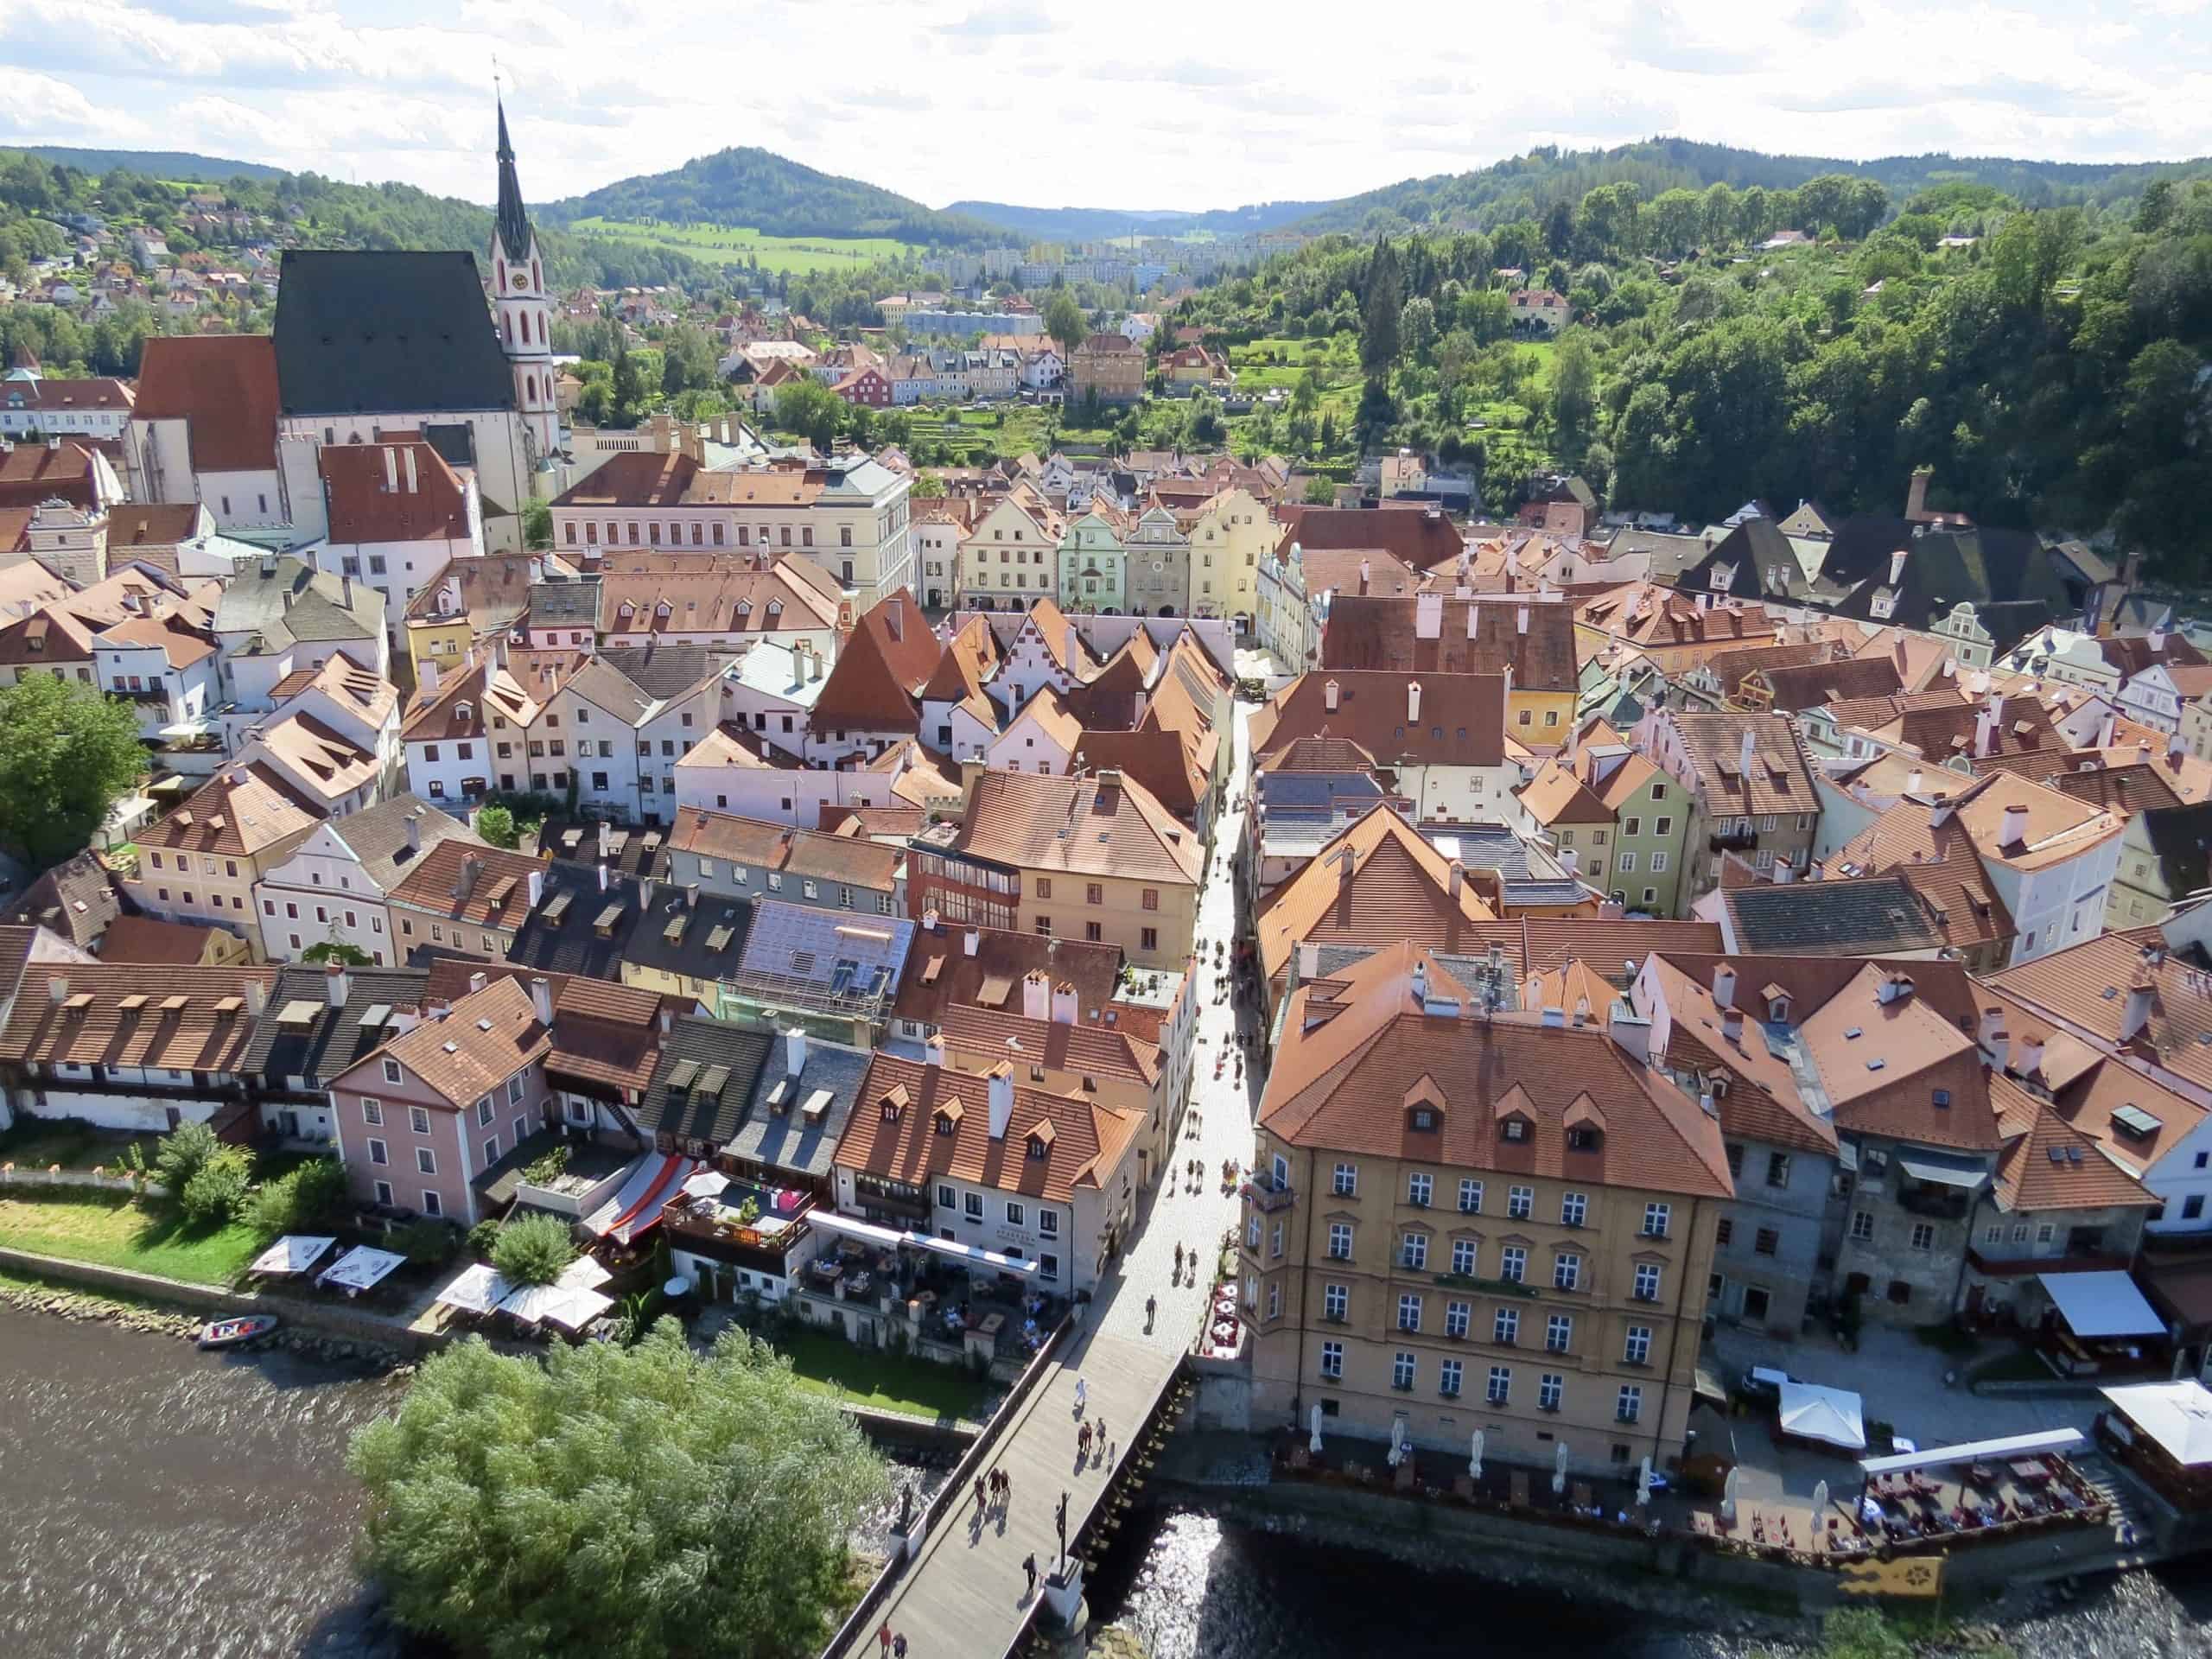 Climbing the castle tower to enjoy the views is definitely one of the best things to do in Český Krumlov